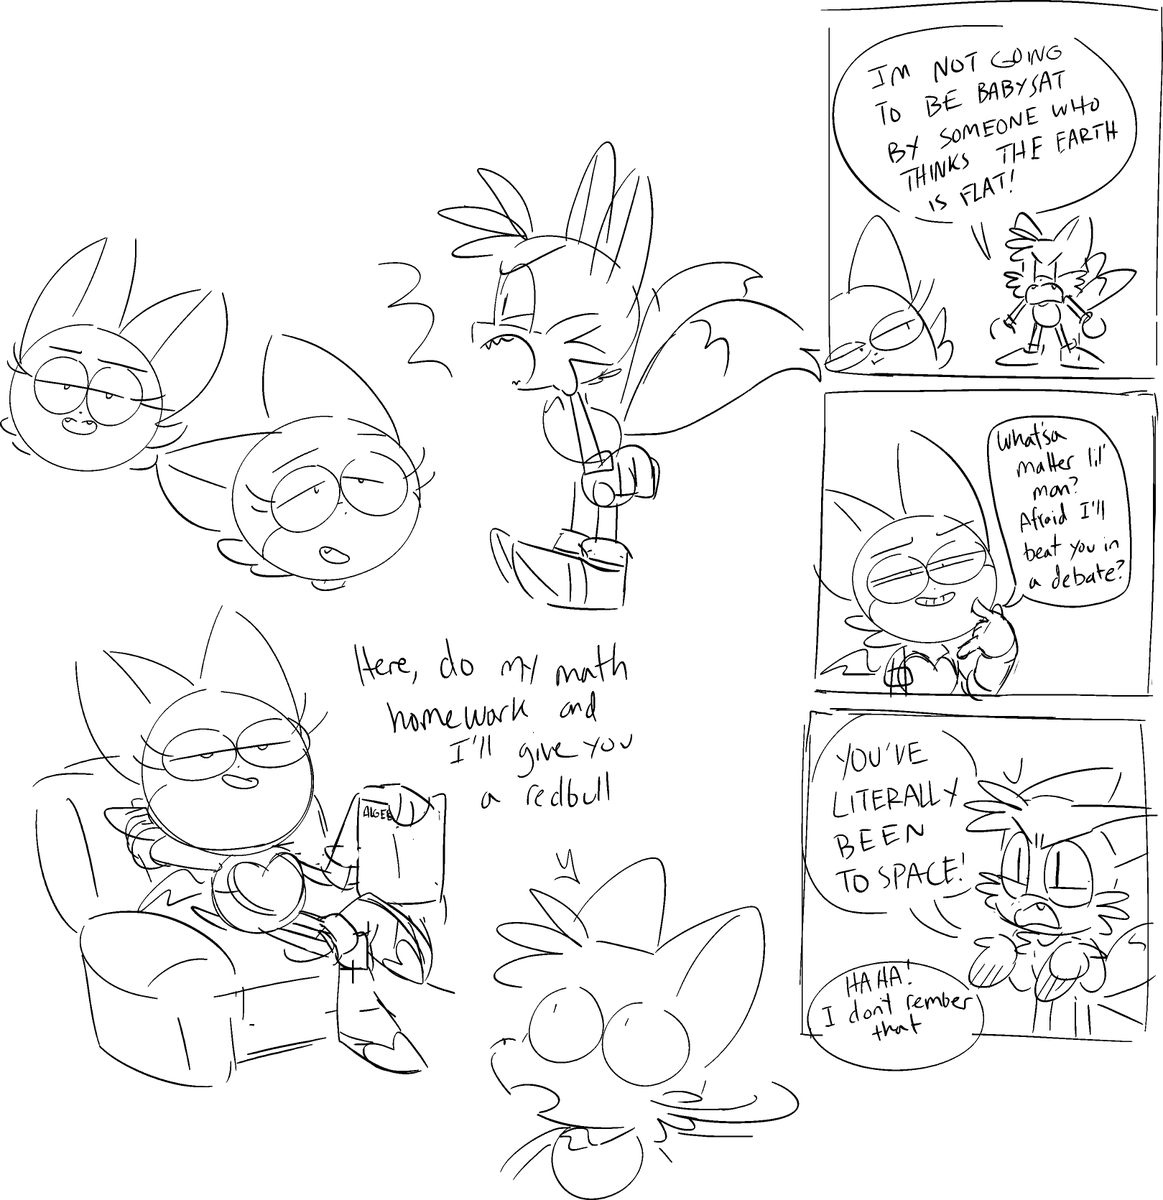 rouge babysits tails bc he's 8 